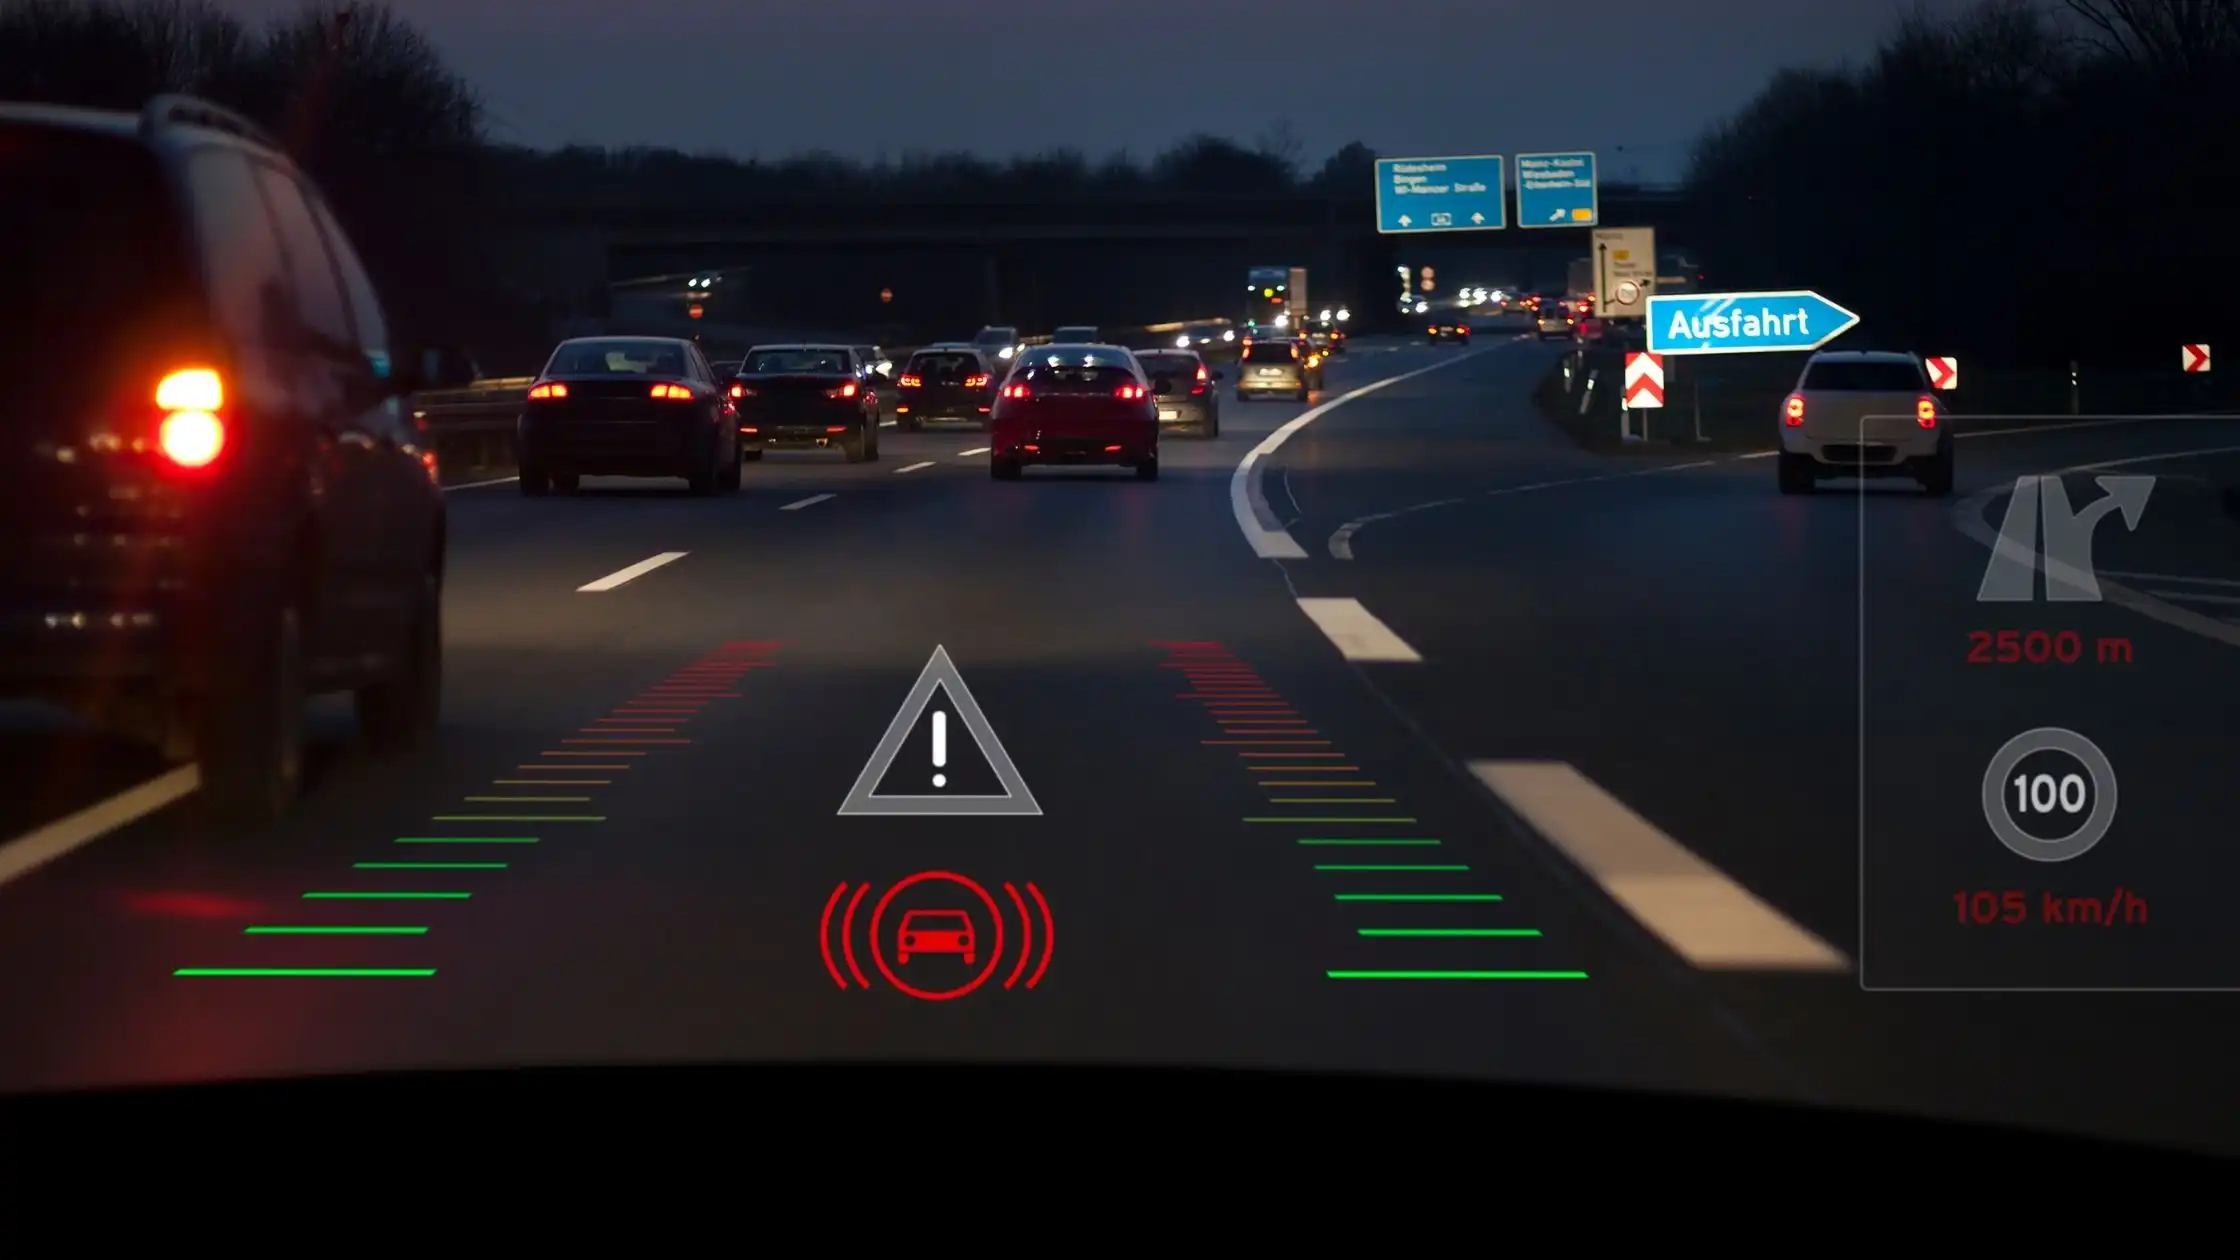 Head-up displays (HUDs) in cars: what are they?